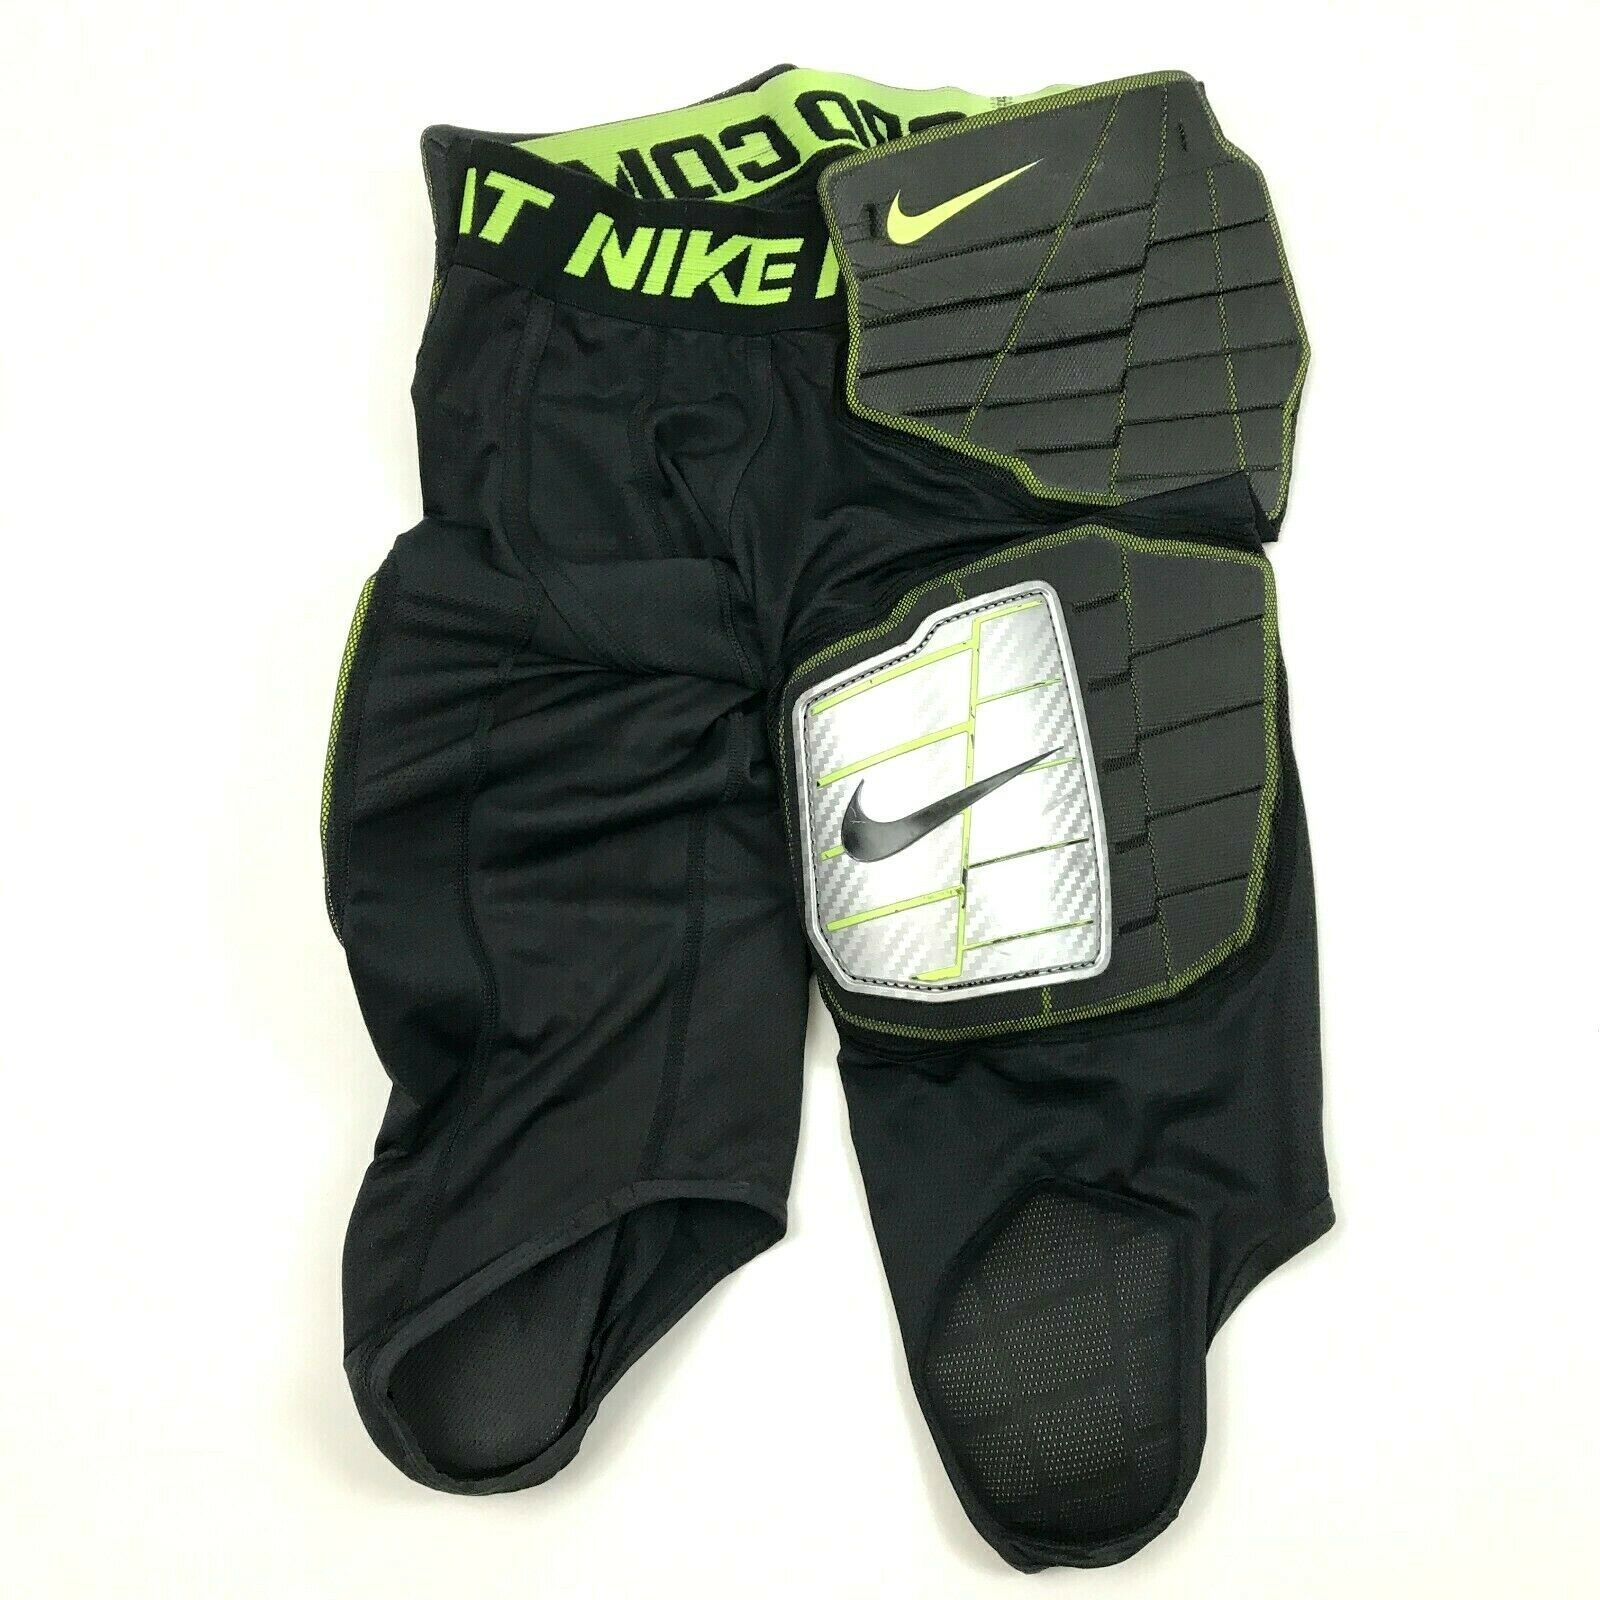 nike compression pants with padding